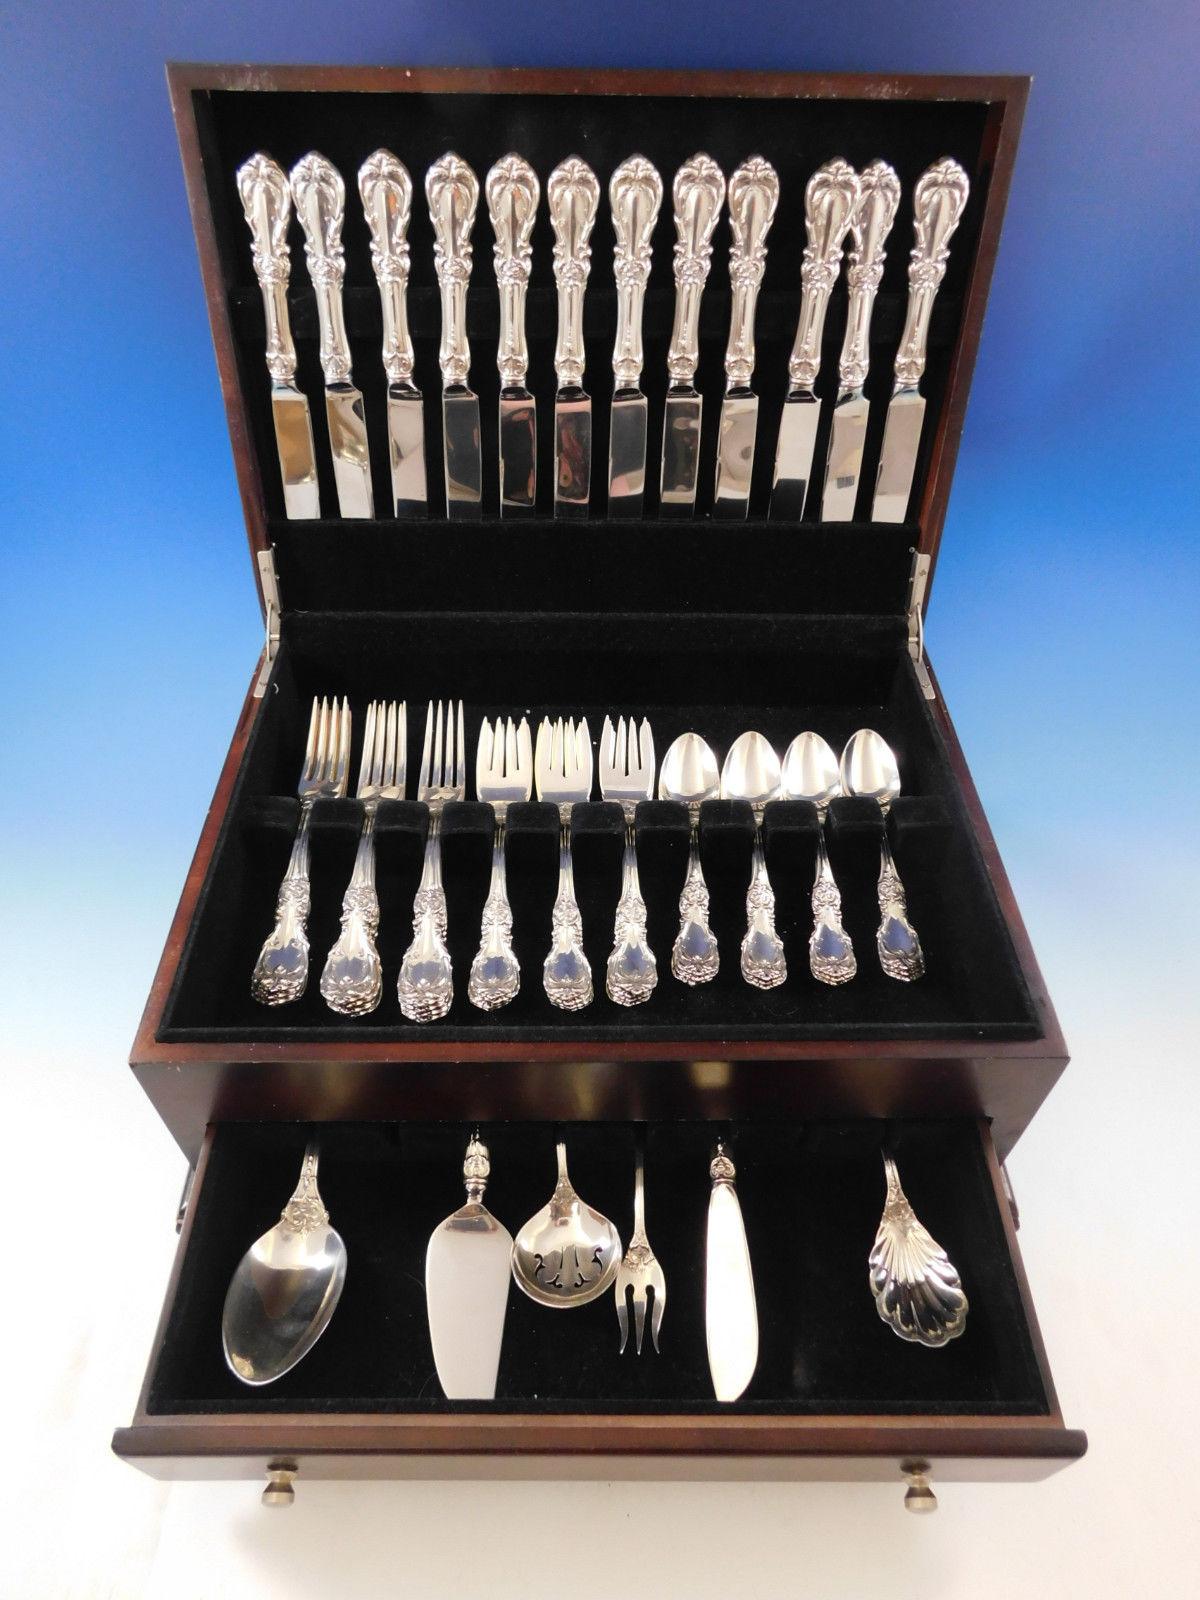 Burgundy by Reed & Barton sterling silver flatware set - 54 pieces. This set includes:

12 knives, 8 1/2